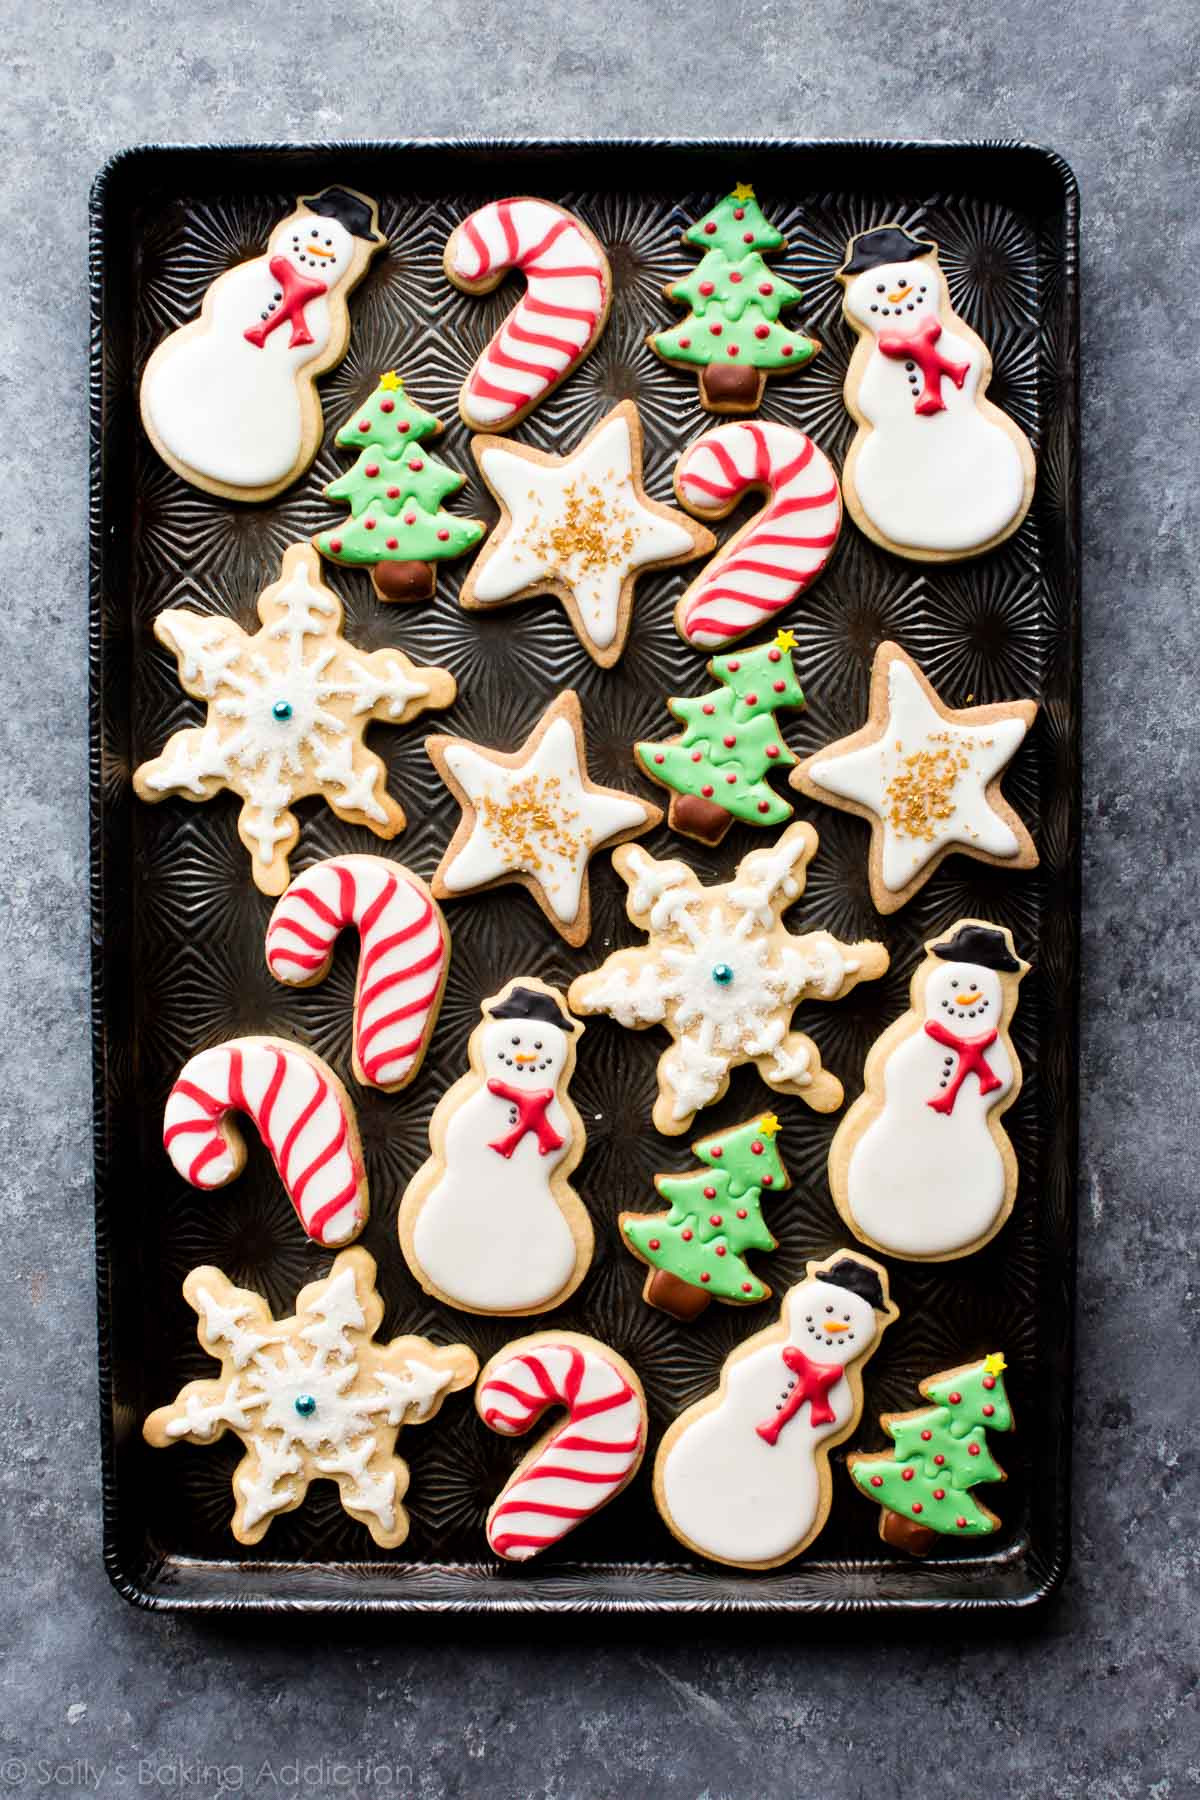 Pictures Of Christmas Cookies Decorated
 1 Sugar Cookie Dough 5 Ways to Decorate Sallys Baking